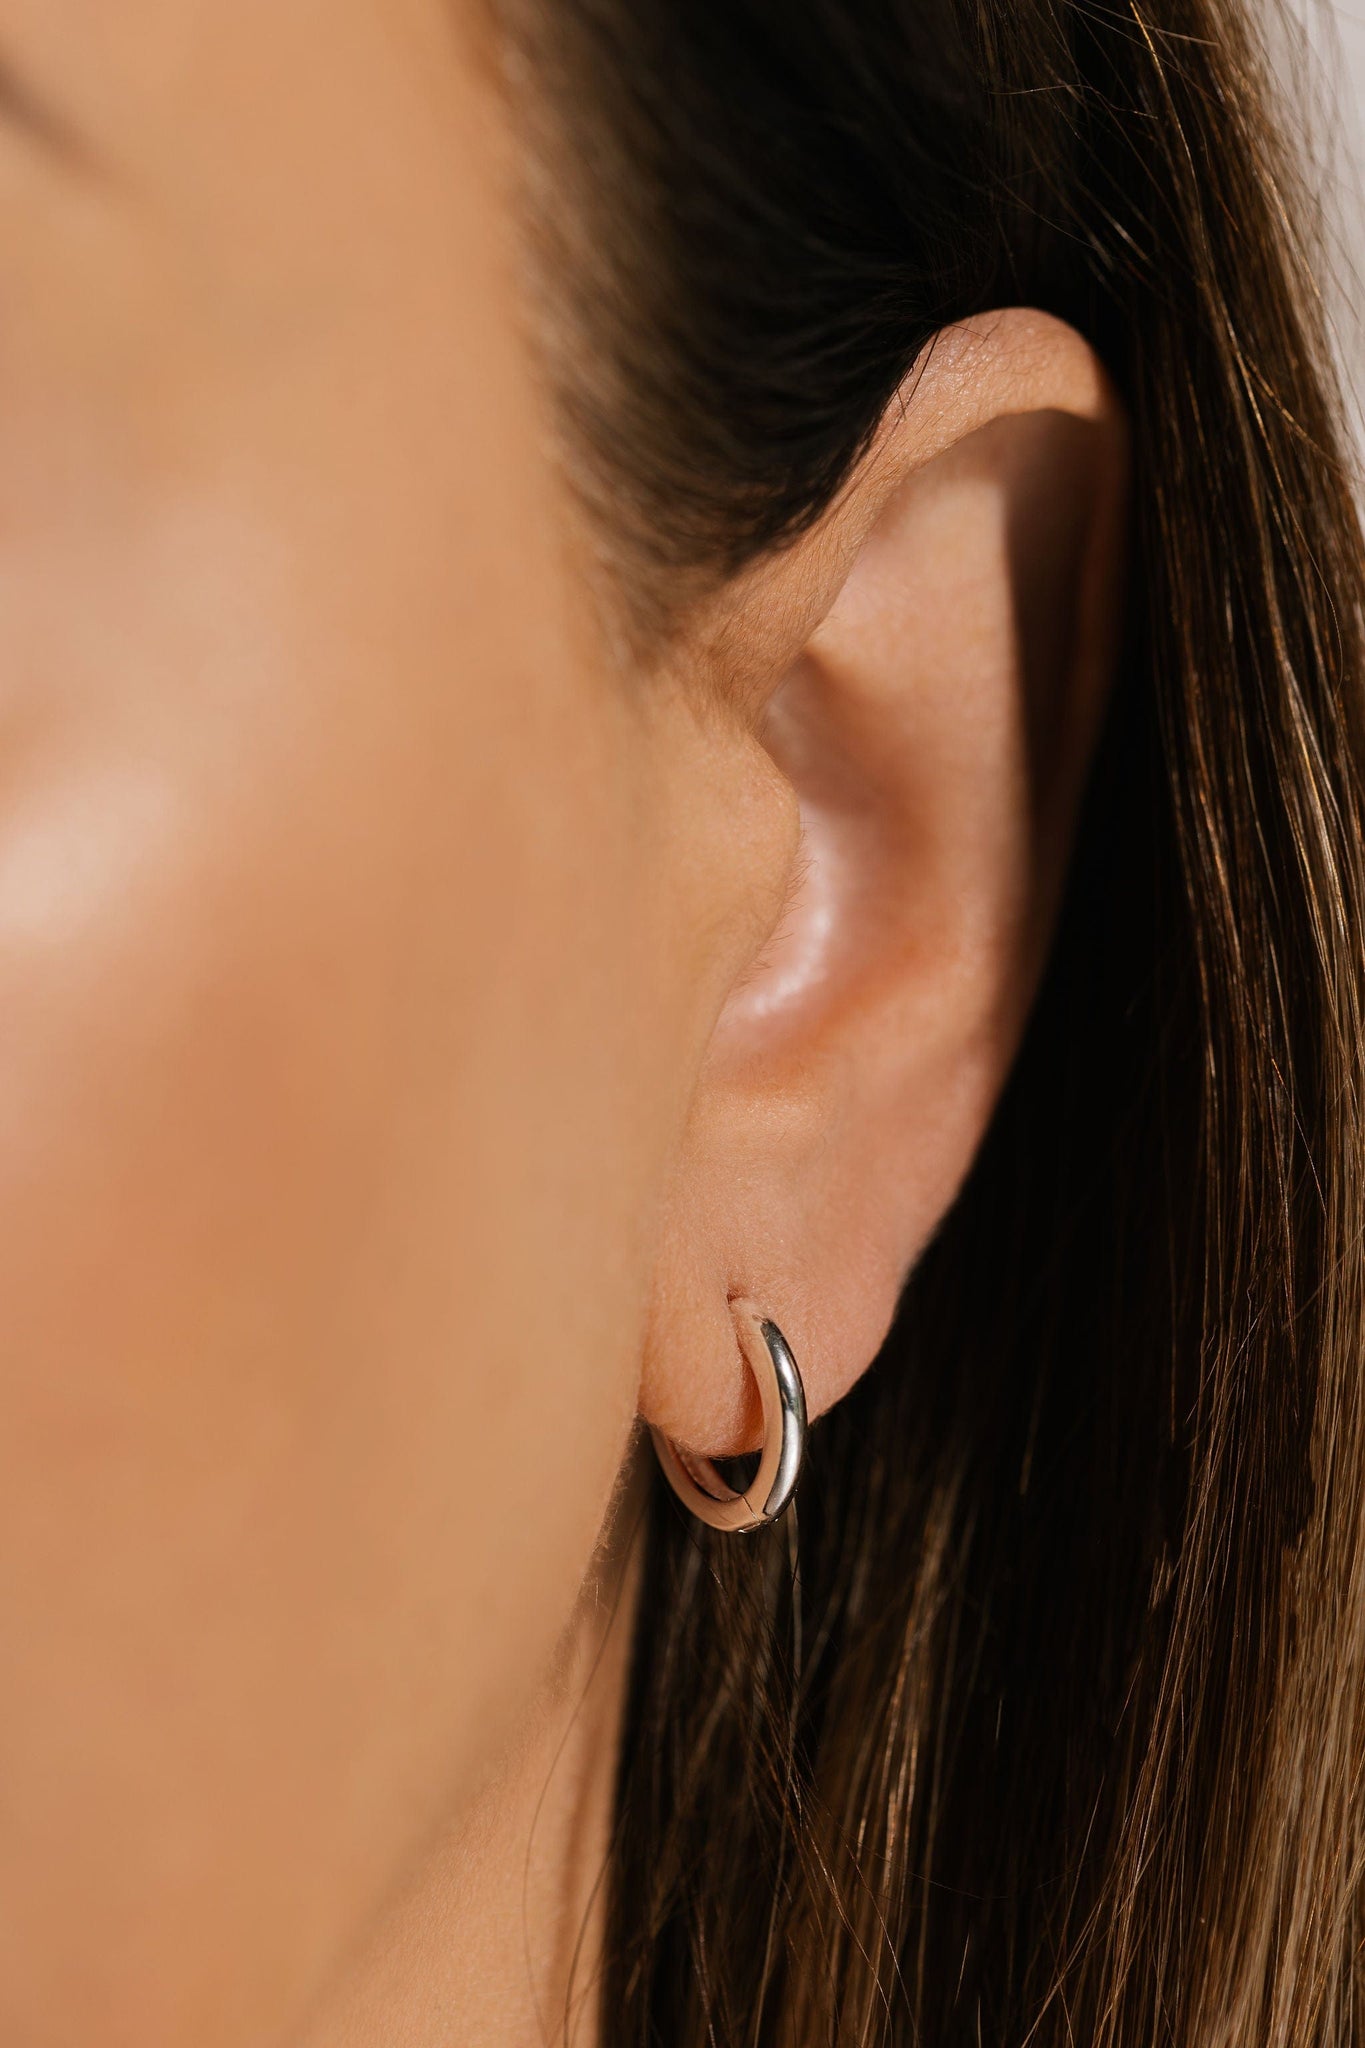 A close-up view shows the dainty Ravello Huggie in sterling silver gracefully curving around the model's ear lobe. 